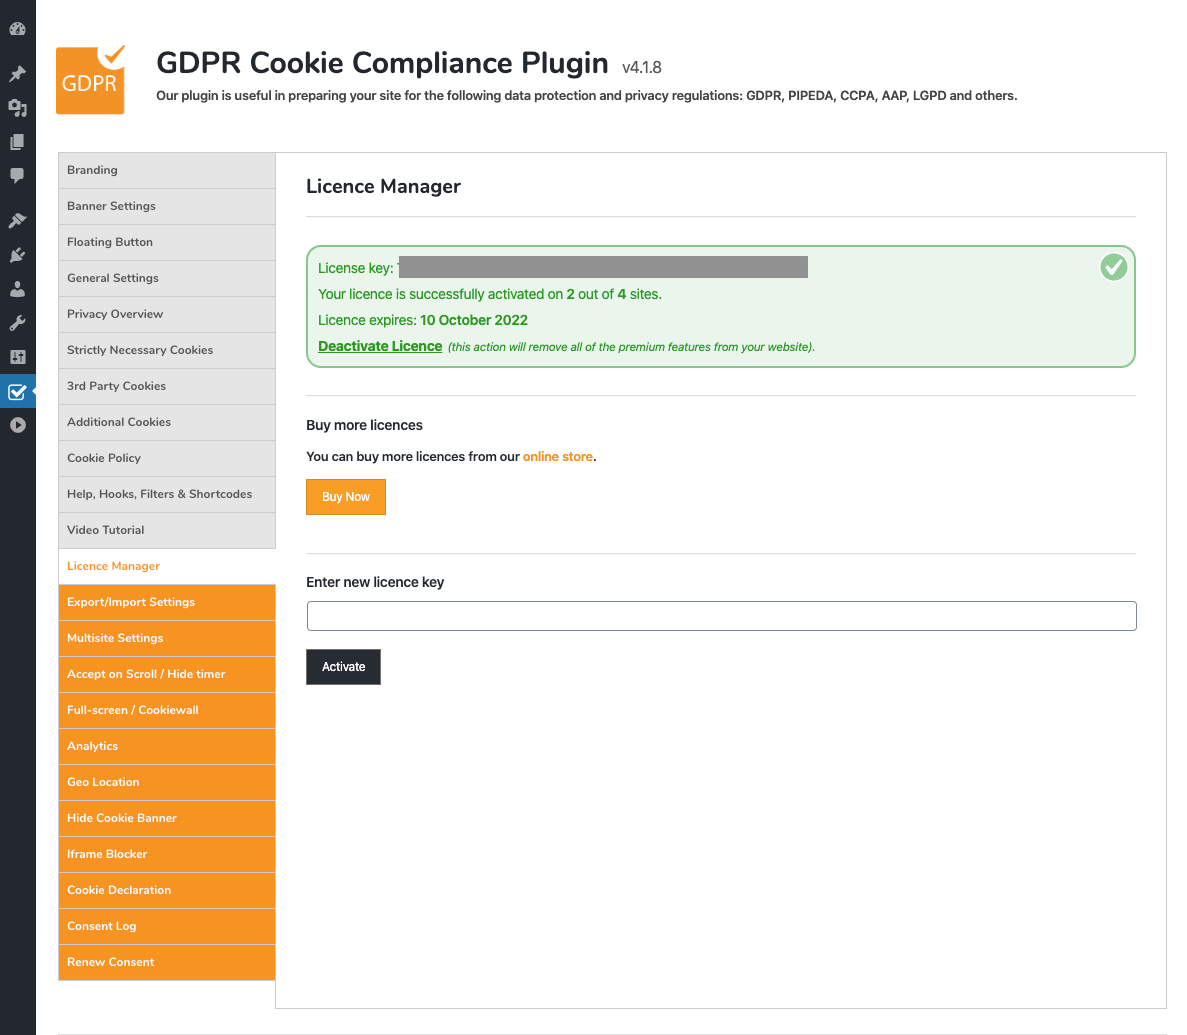 GDPR Cookie Compliance - Admin - Licence Manager